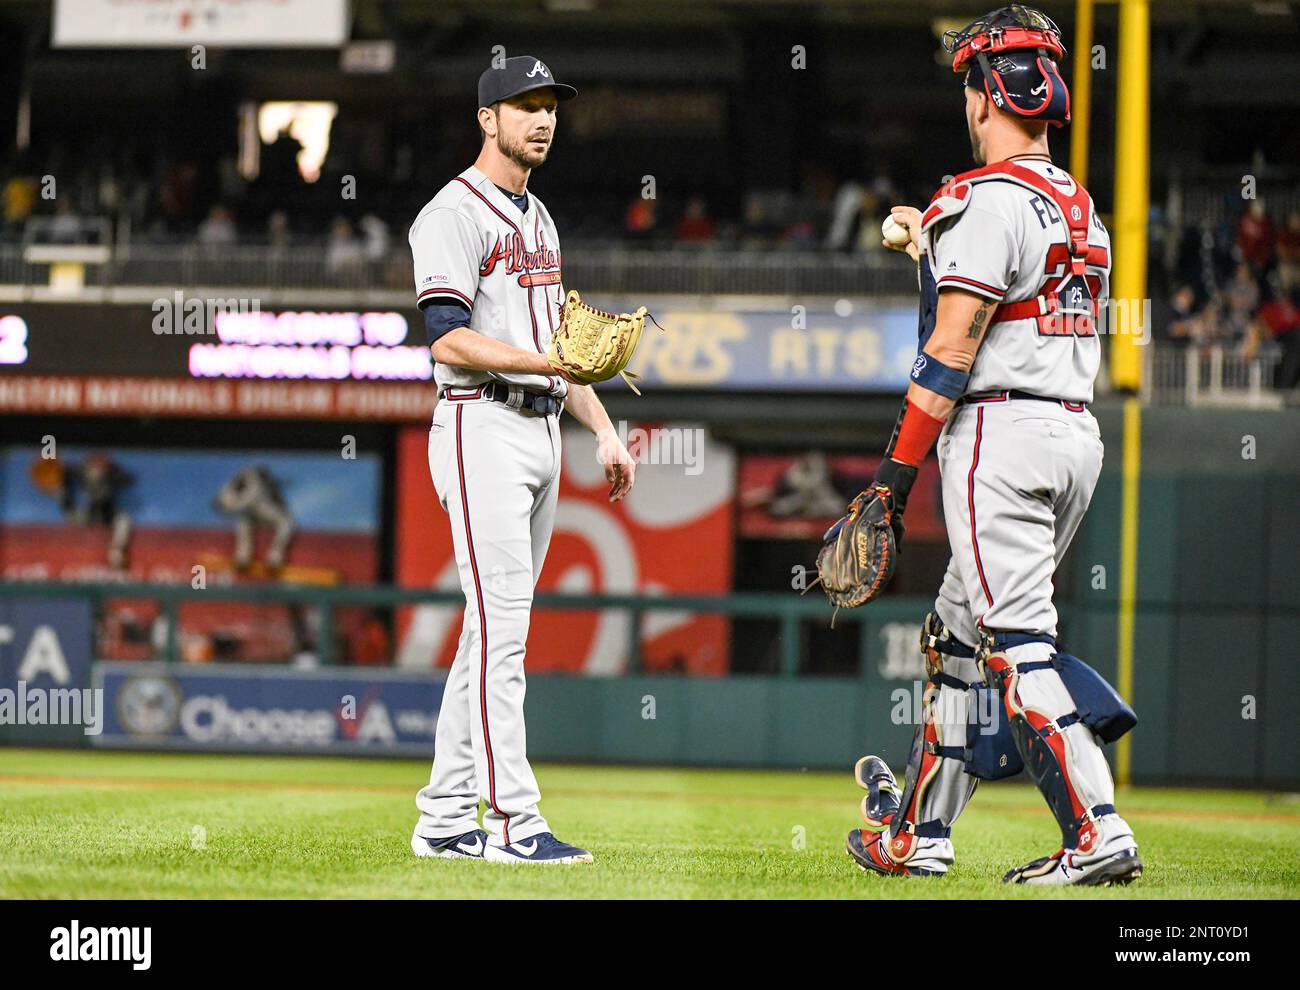 WASHINGTON, DC - SEPTEMBER 13: Atlanta Braves relief pitcher Jerry Blevins  (50) is congratulated by catcher Tyler Flowers (25) following the game  against the Washington Nationals on September 13, 2019, at Nationals